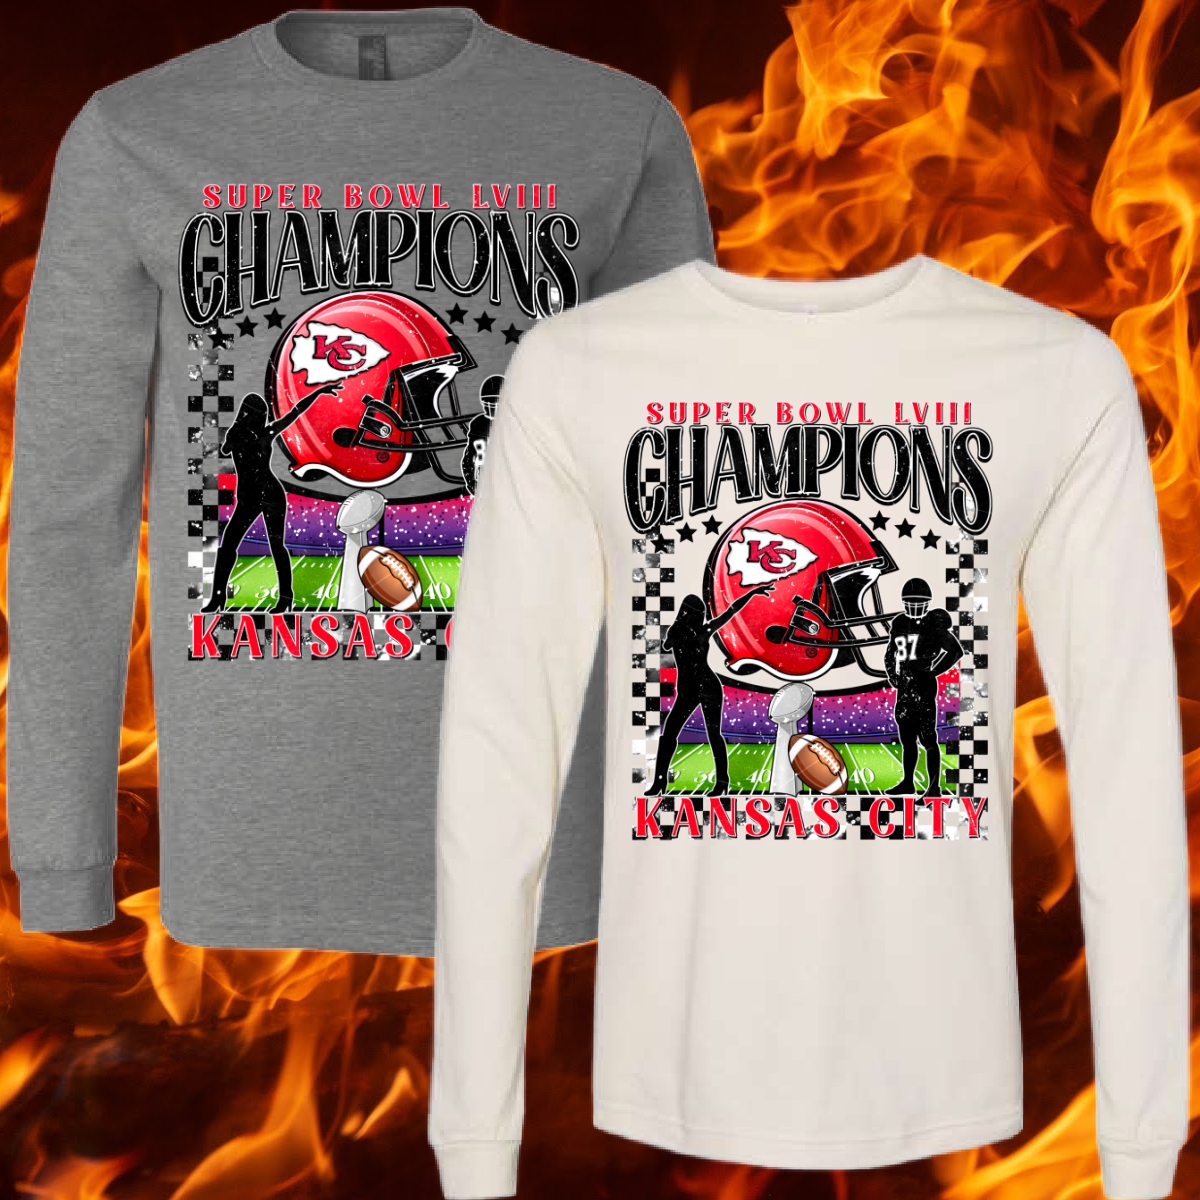 Chiefs/TS Champions Short & Long Sleeve Tees (Adult) - PREORDER - WILL SHIP BY 3/11